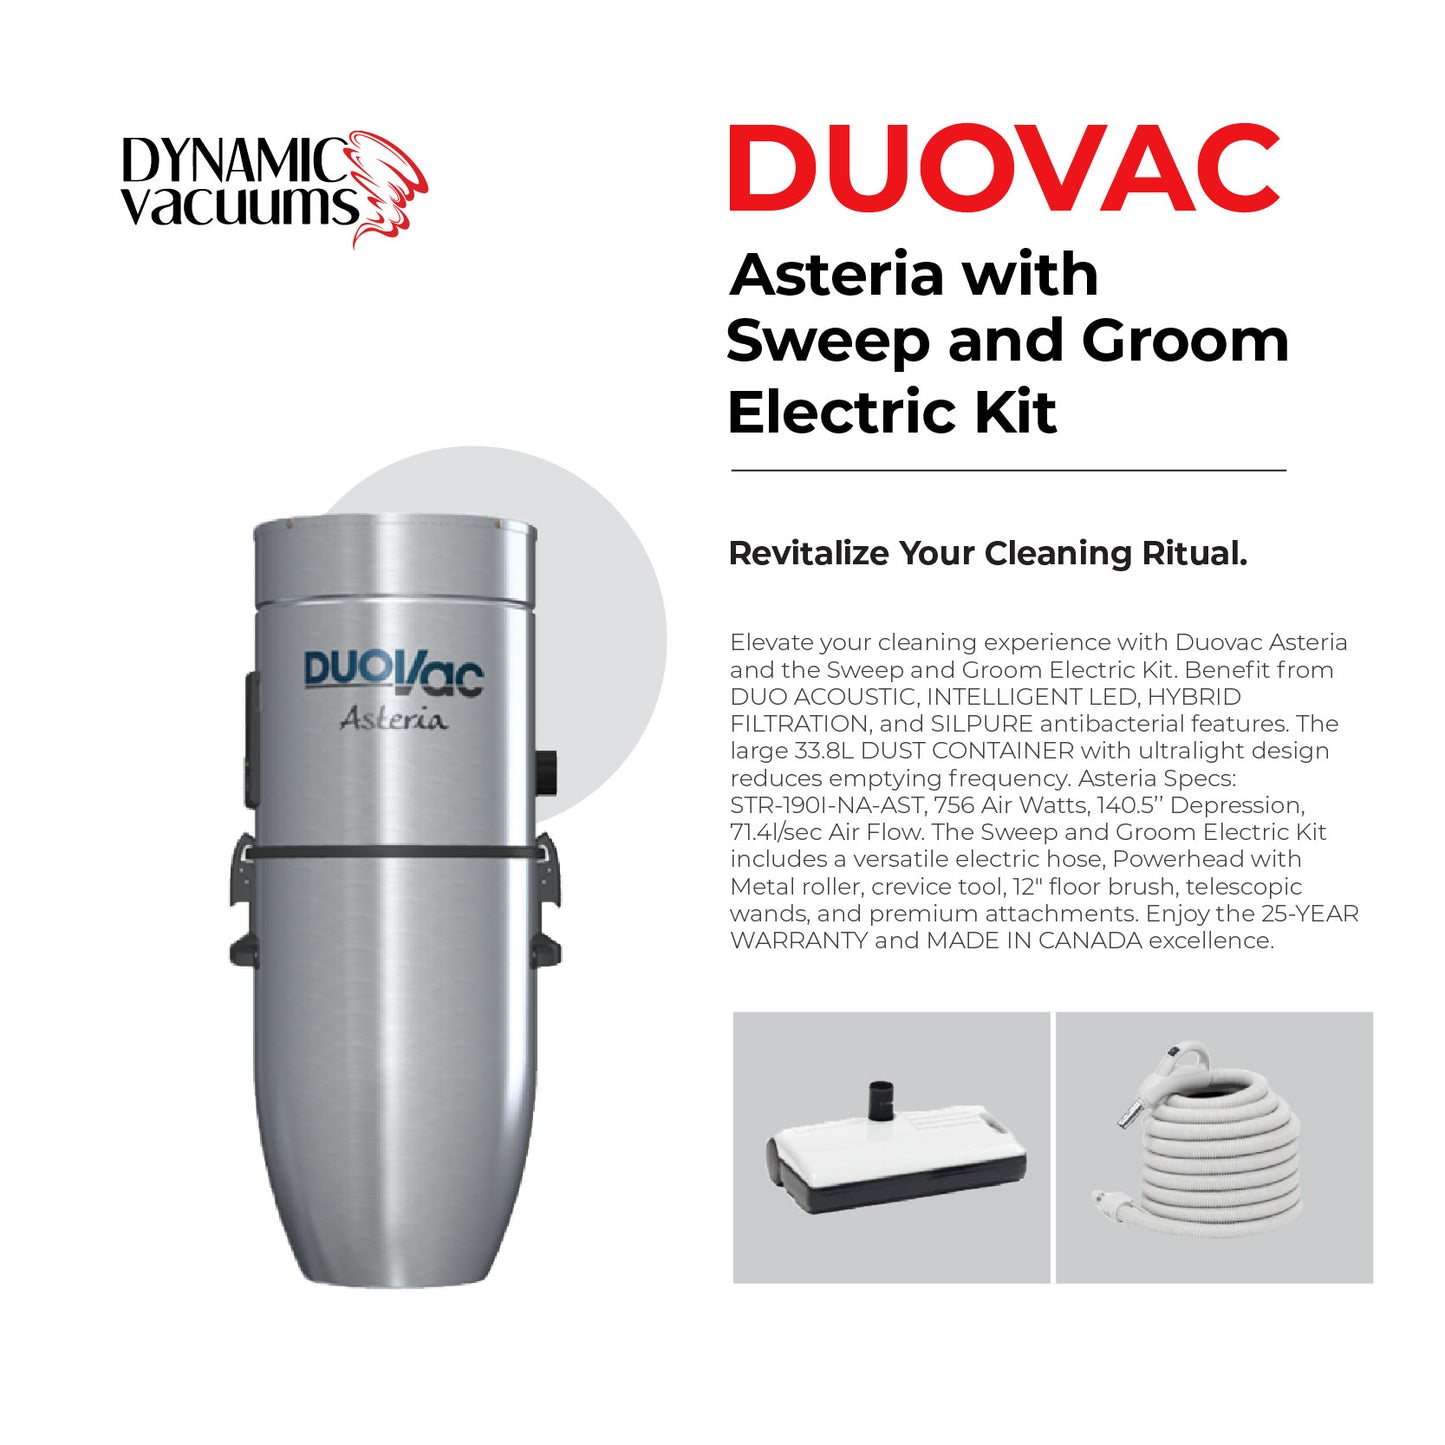 Duovac Asteria with Sweep and Groom Electric Kit